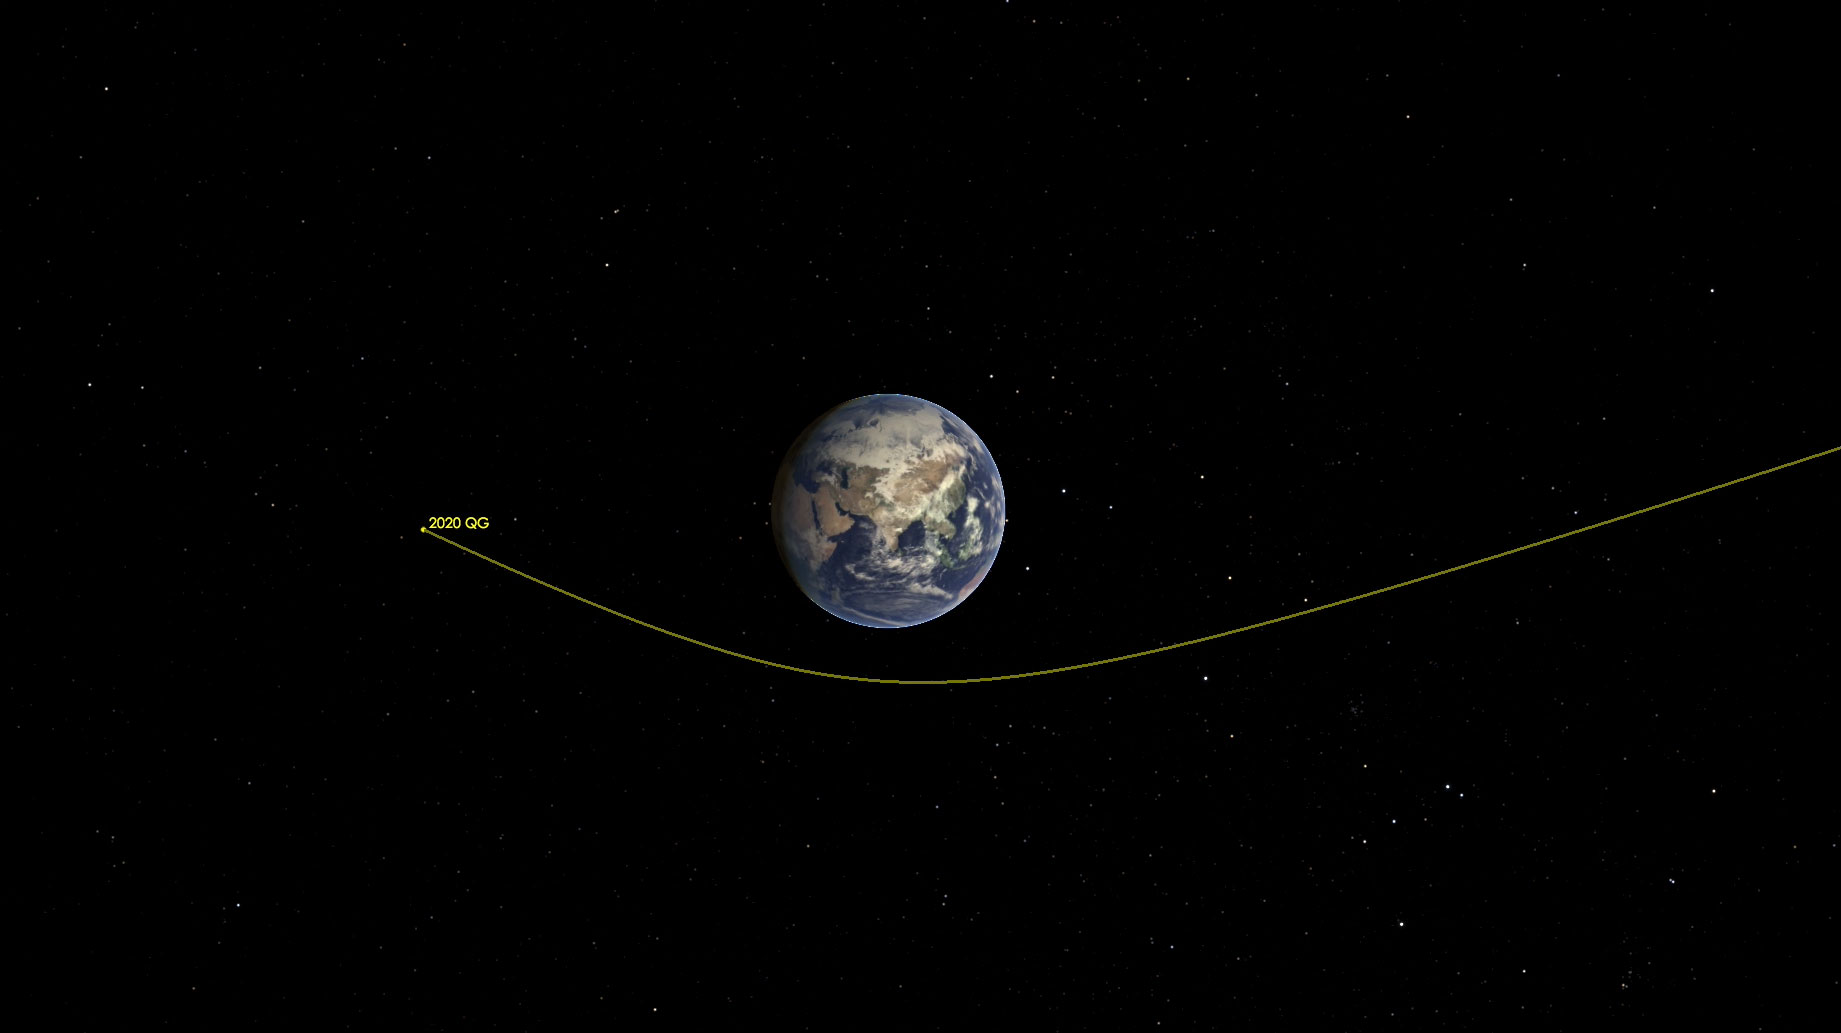 This illustration shows asteroid 2020 QG's trajectory